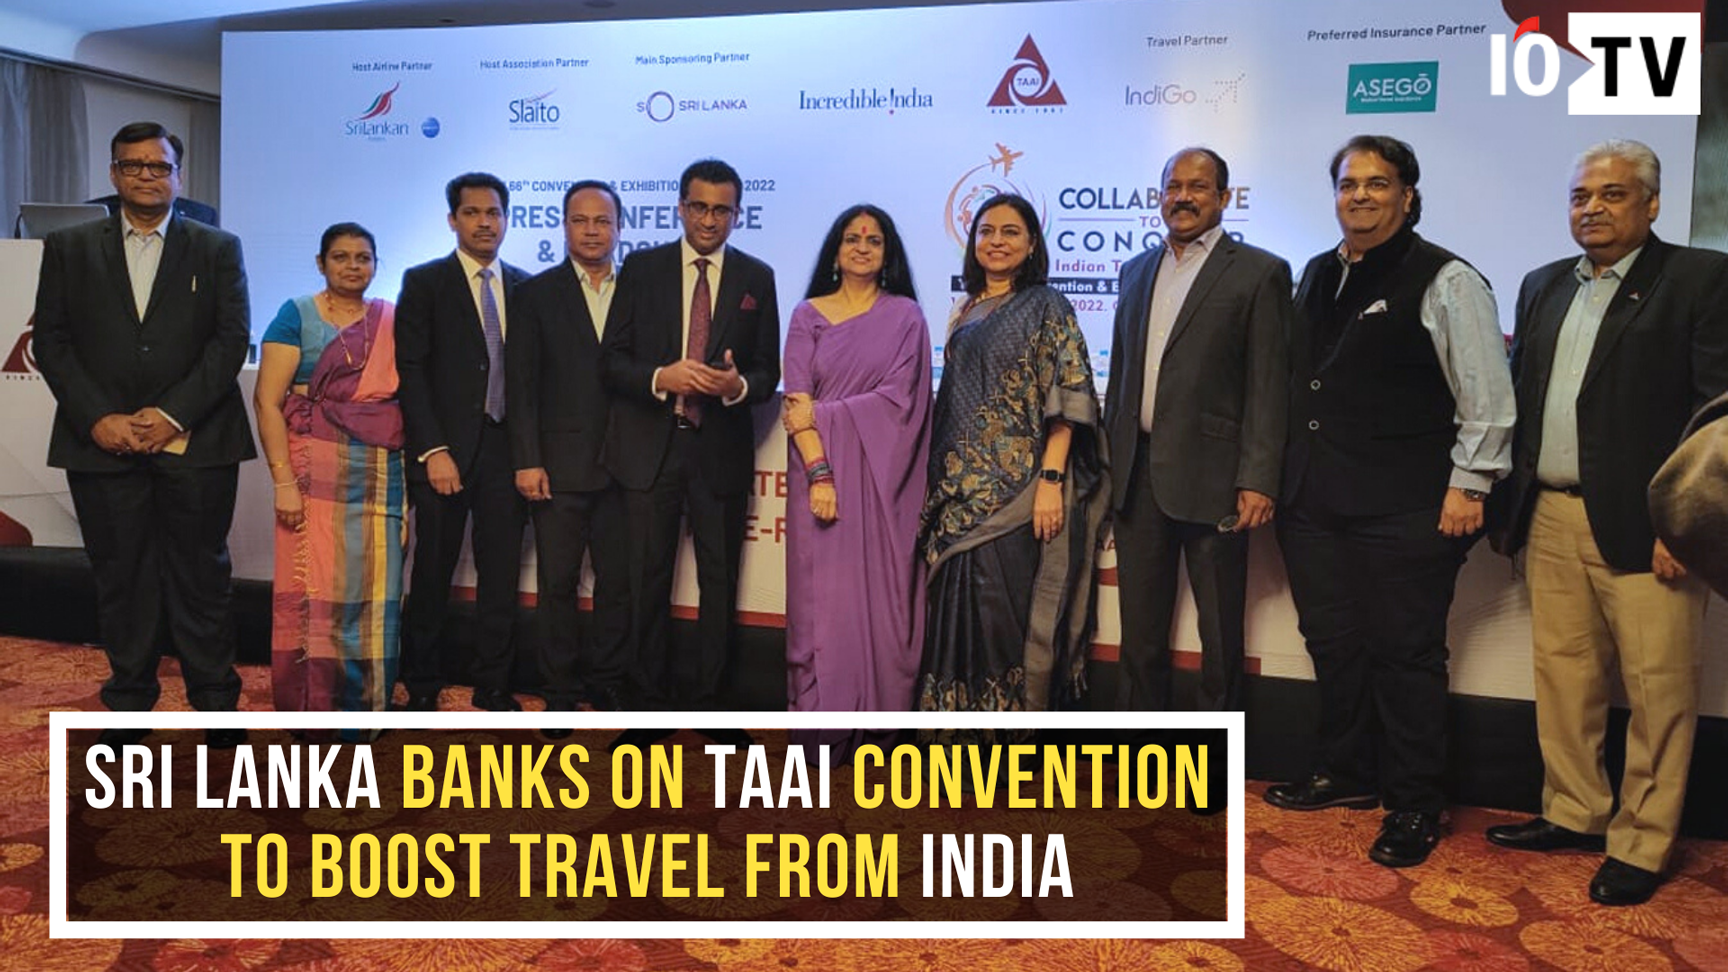 Sri Lanka banks on TAAI Convention to boost travel from India